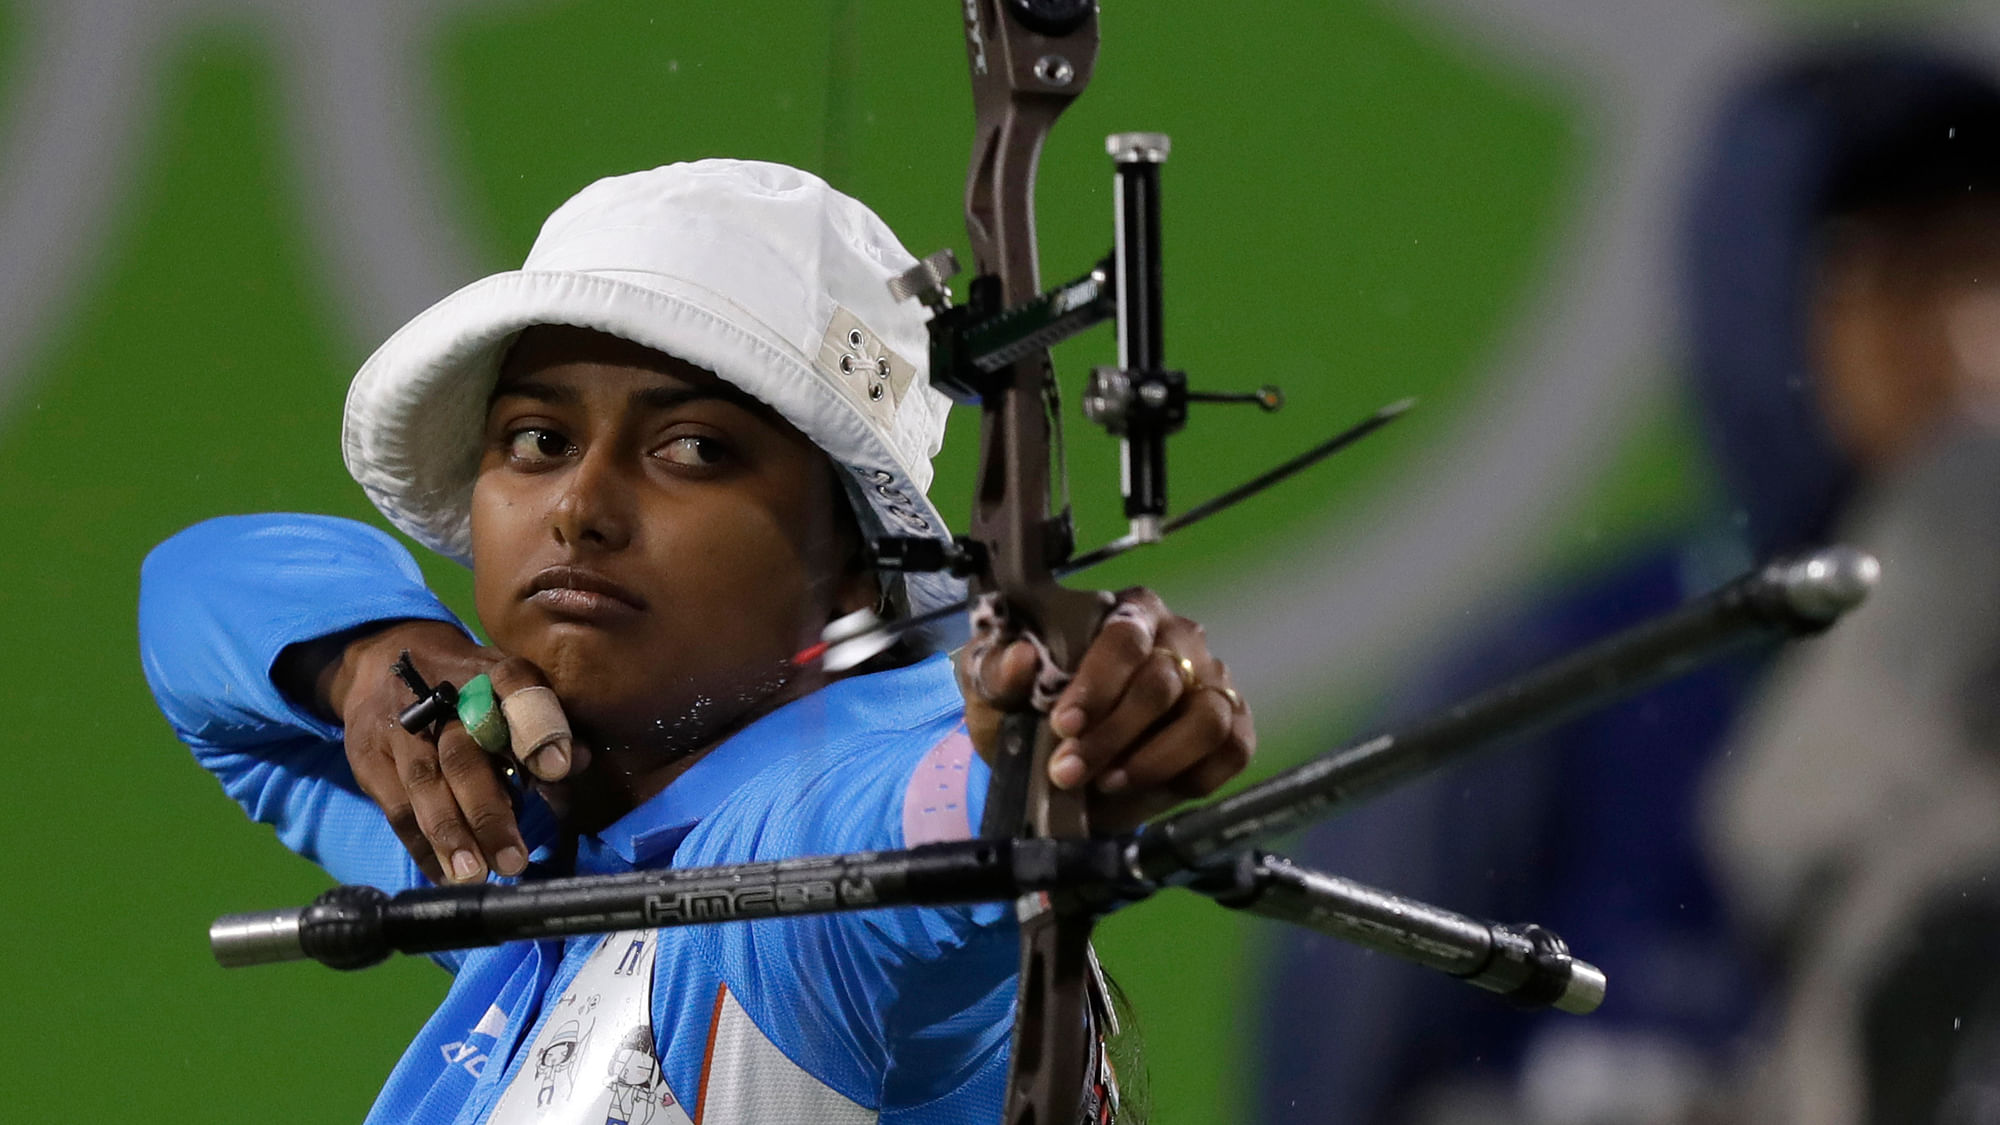 File picture of Indian archer Deepika Kumari who was eliminated in the pre-quarters of the recurve event at the Asian Games.